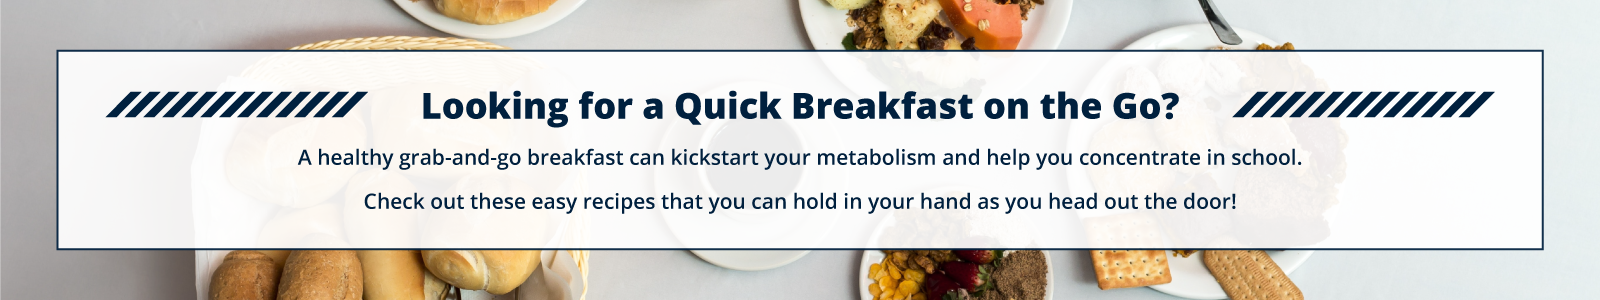 Looking for a Quick Breakfast on the Go?  A healthy grab-and-go breakfast can kickstart your metabolism and help you concentrate in school.  Check out these easy recipes that you can hold in your hand as you head out the door!